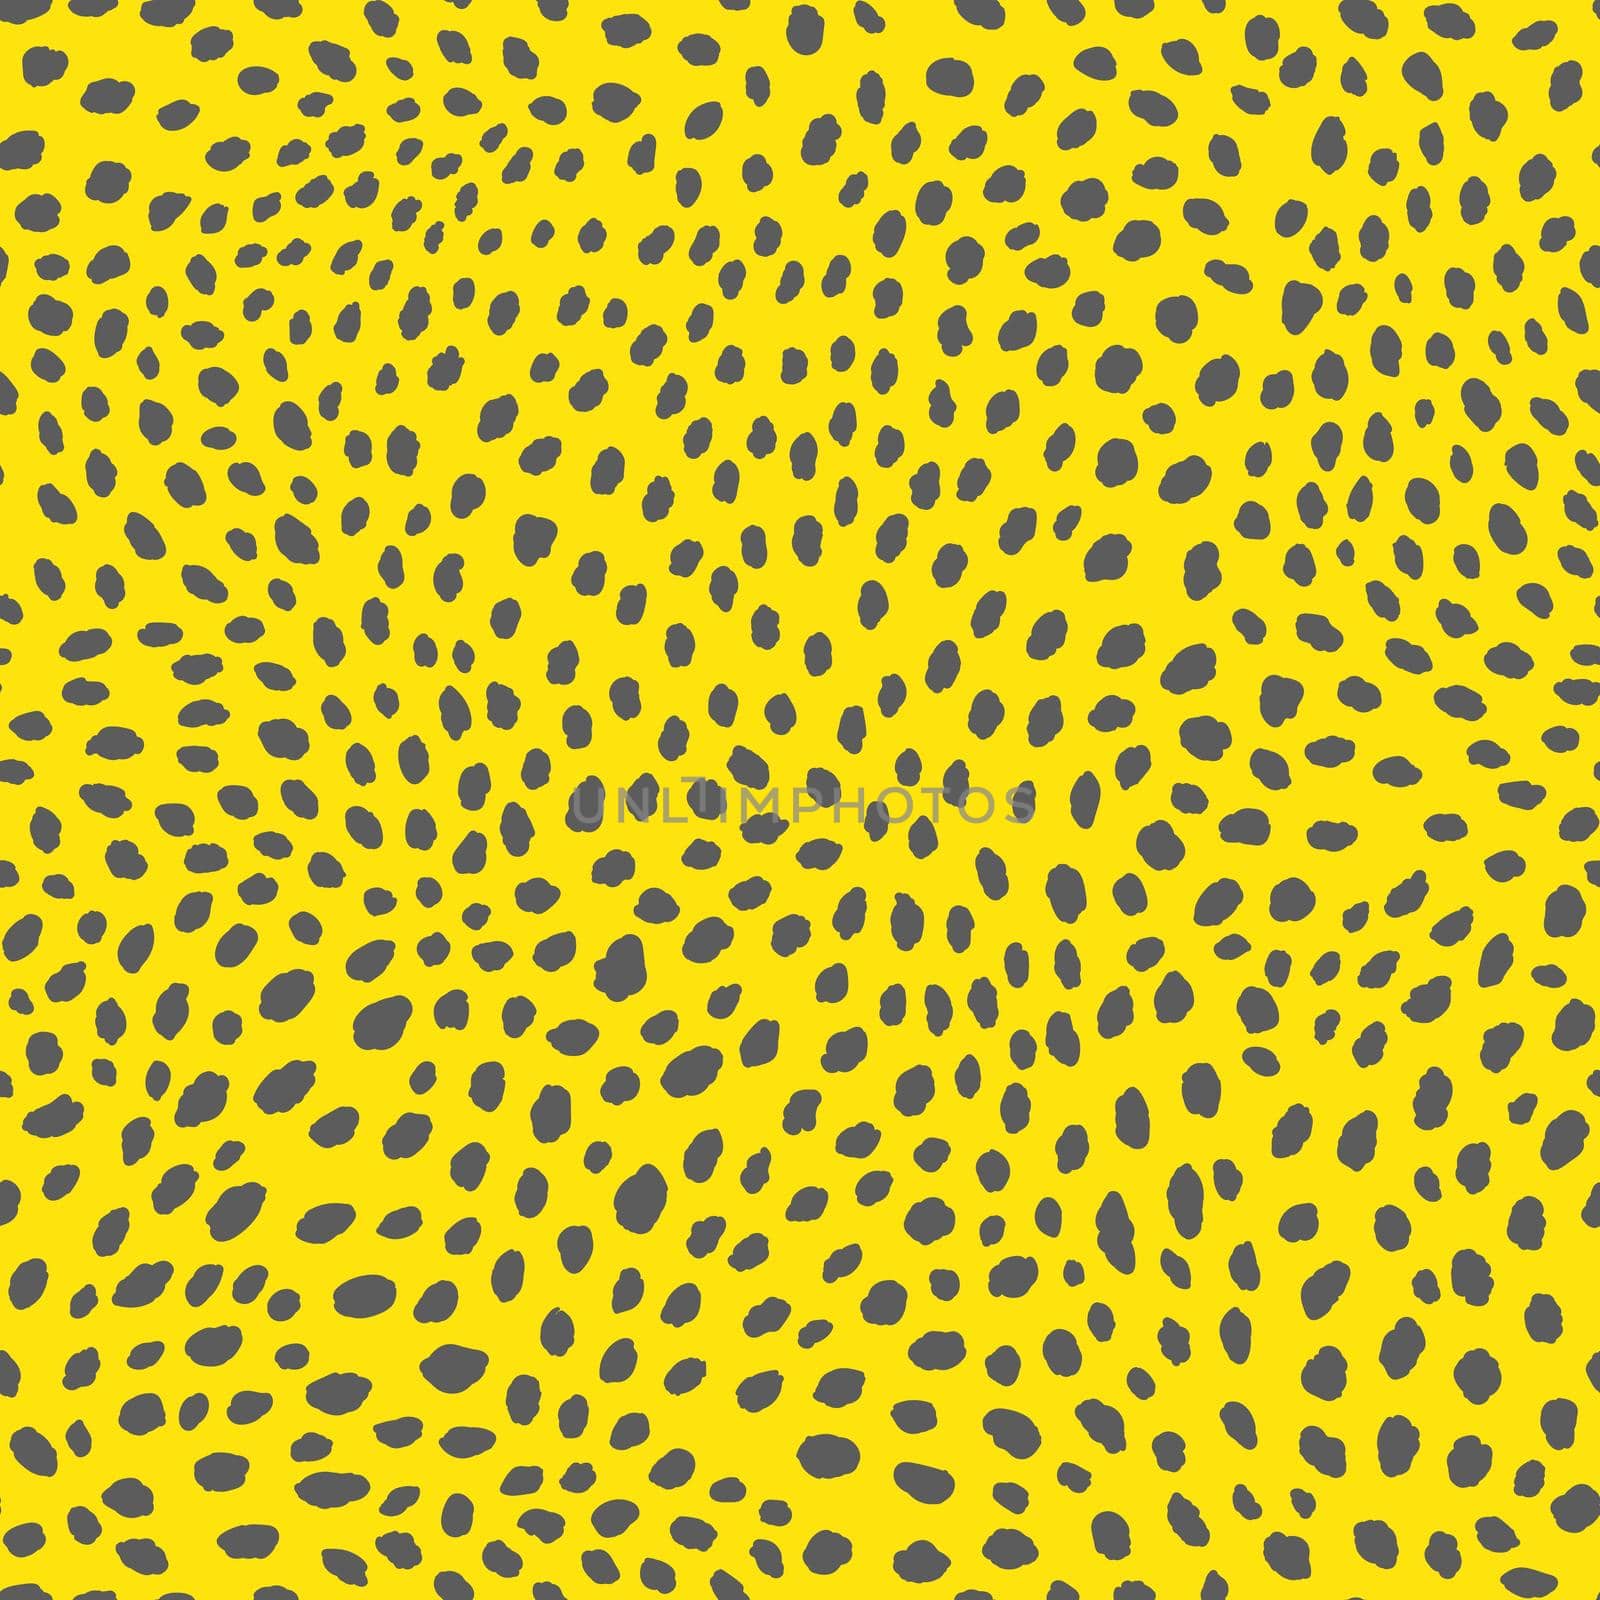 Abstract modern leopard seamless pattern. Animals trendy background. Yellow and grey decorative vector stock illustration for print, card, postcard, fabric, textile. Modern ornament of stylized skin.